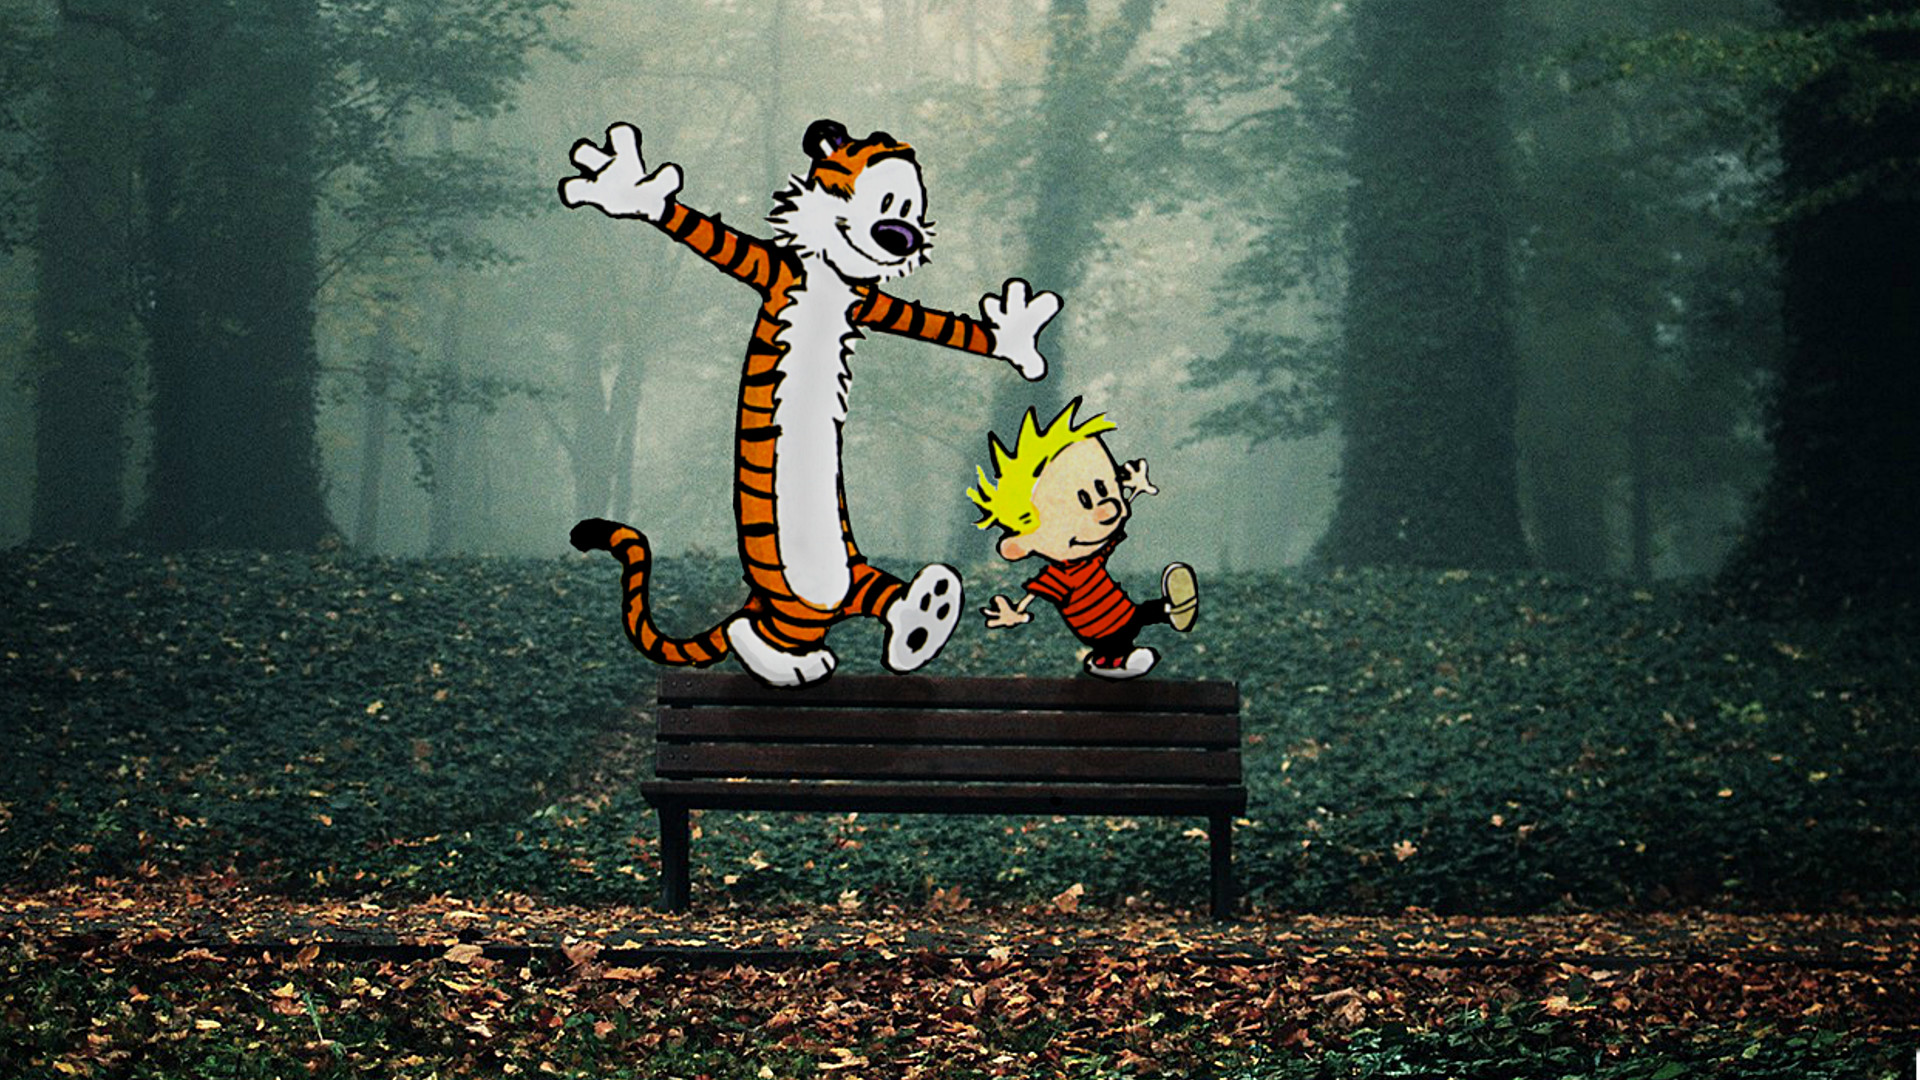 1920x1080 Calvin and Hobbes wallpaper by gwoovysmoothy Calvin and Hobbes wallpaper by  gwoovysmoothy